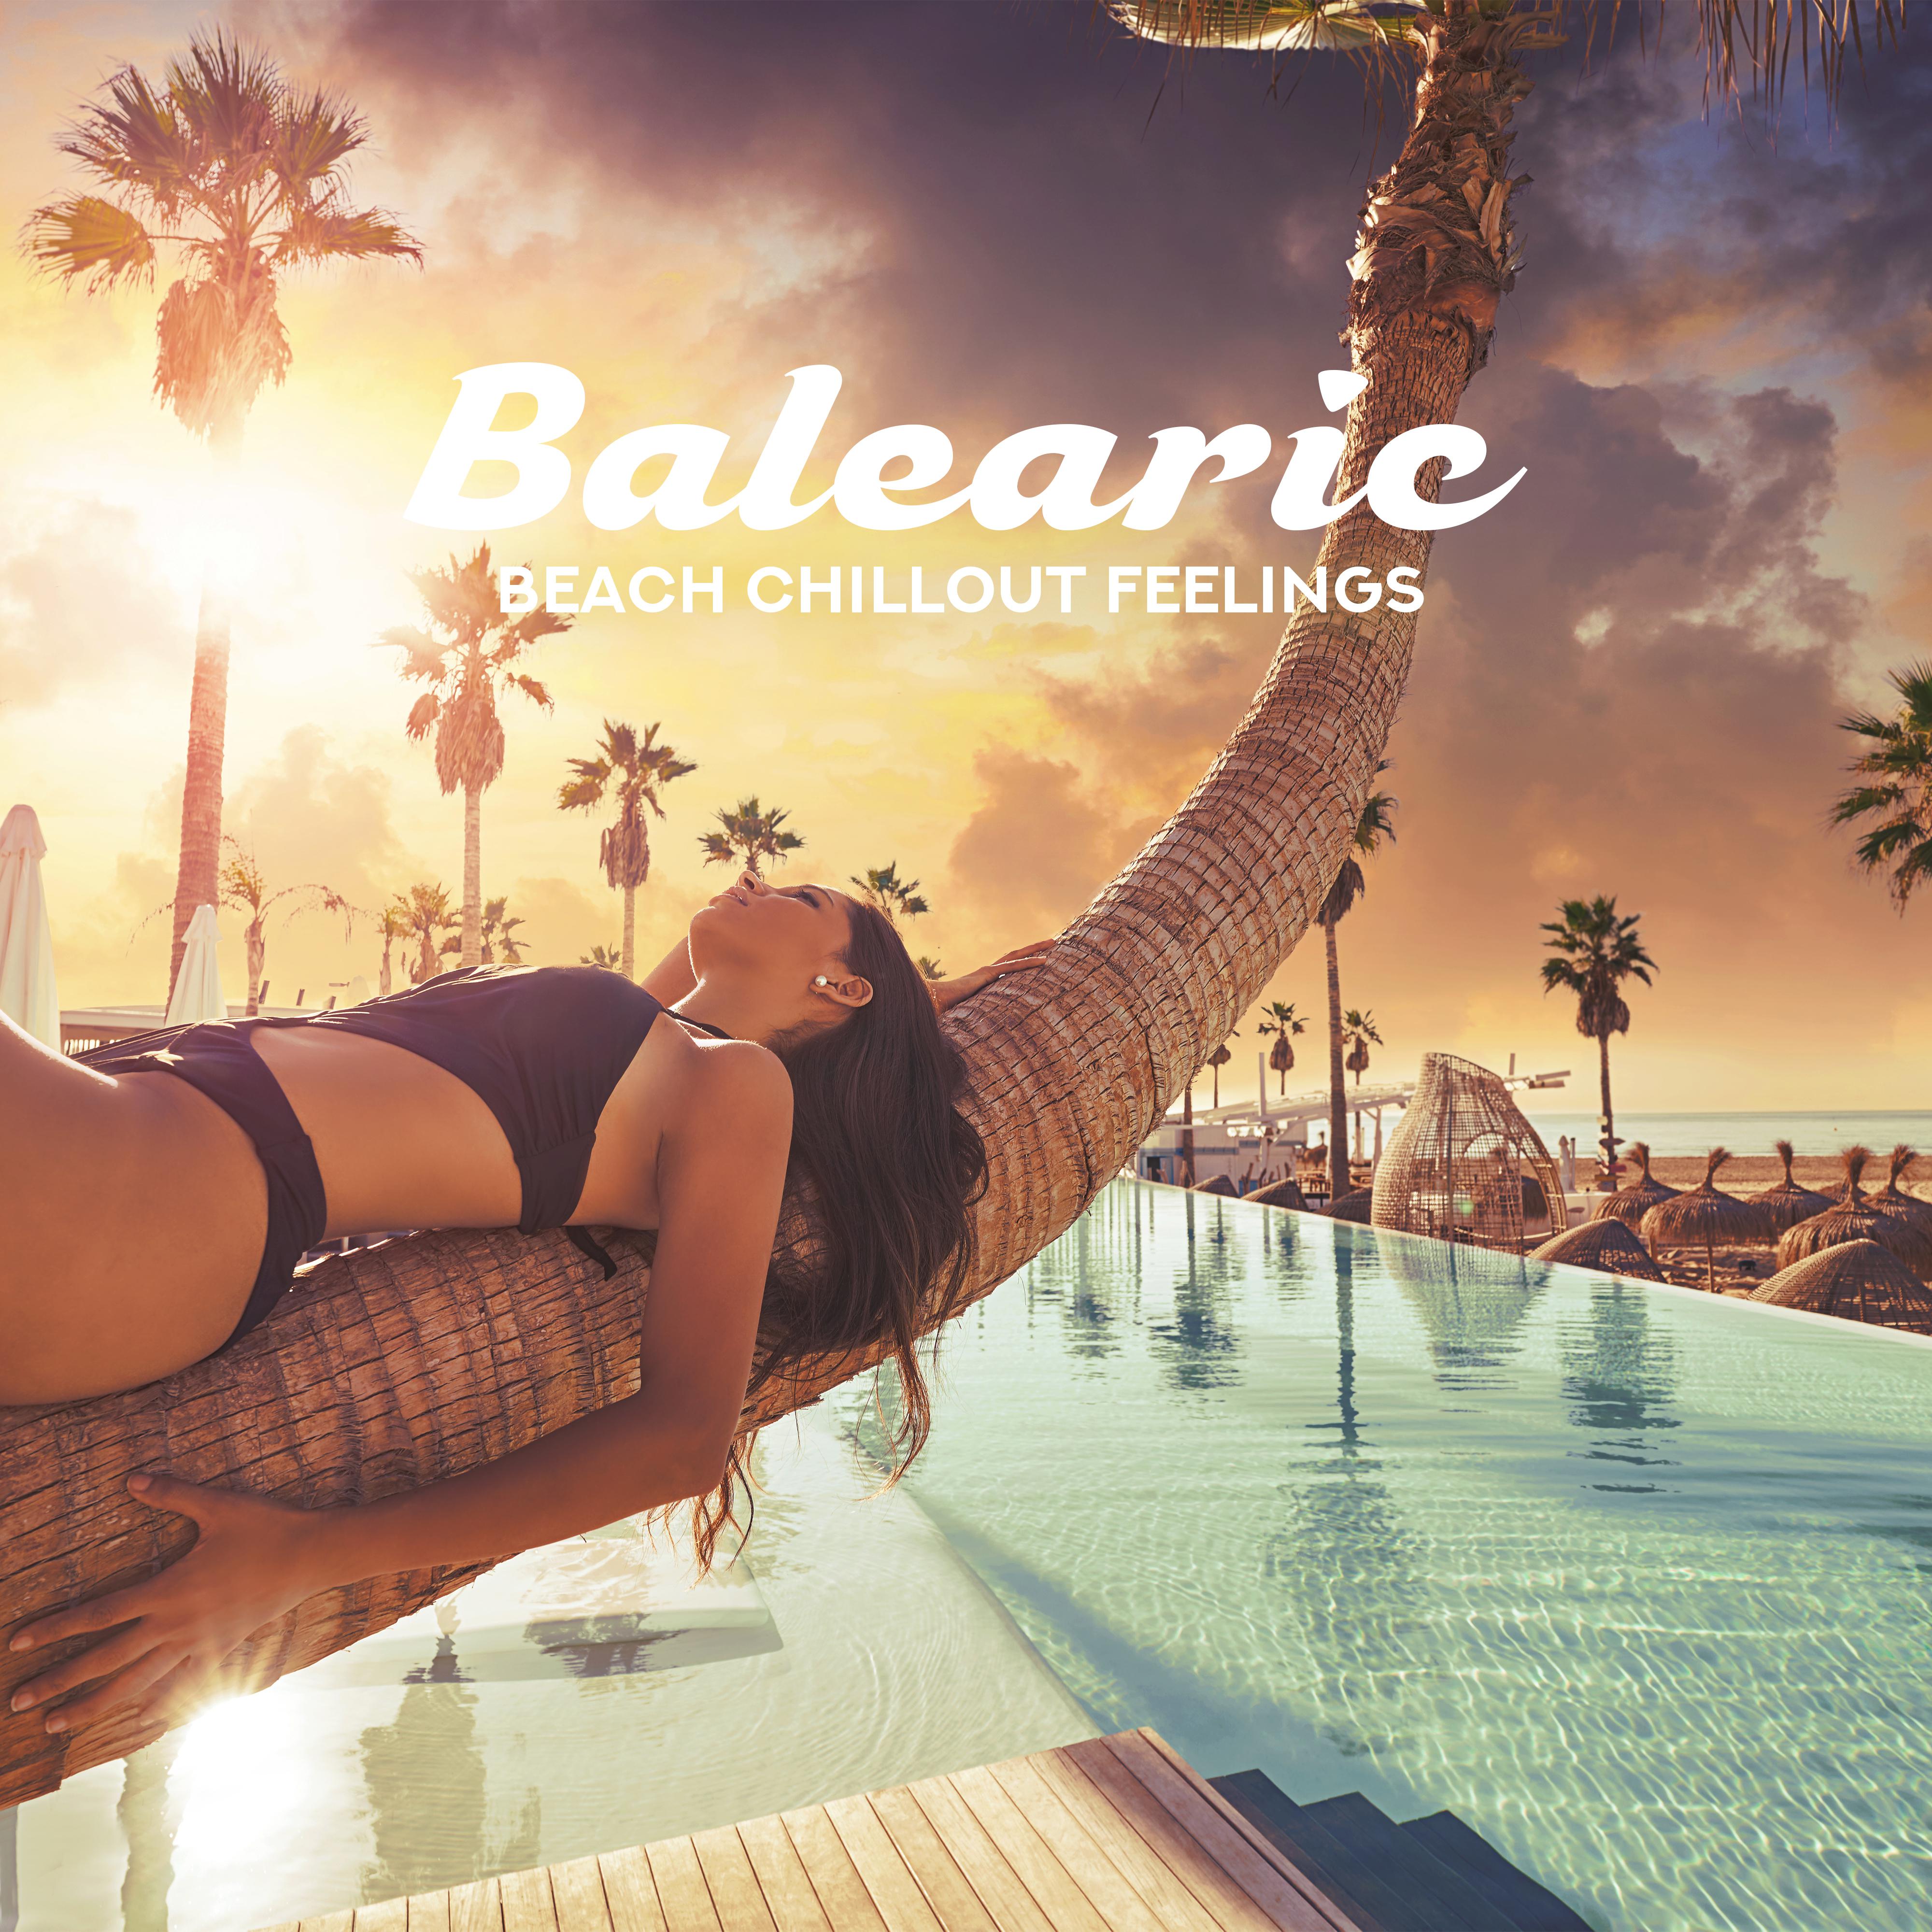 Balearic Beach Chillout Feelings: Only Positive Chill Out 2019 Vibes, Sun Salutatuon & Holiday Celebration, Summer Vacation Beats & Melodies